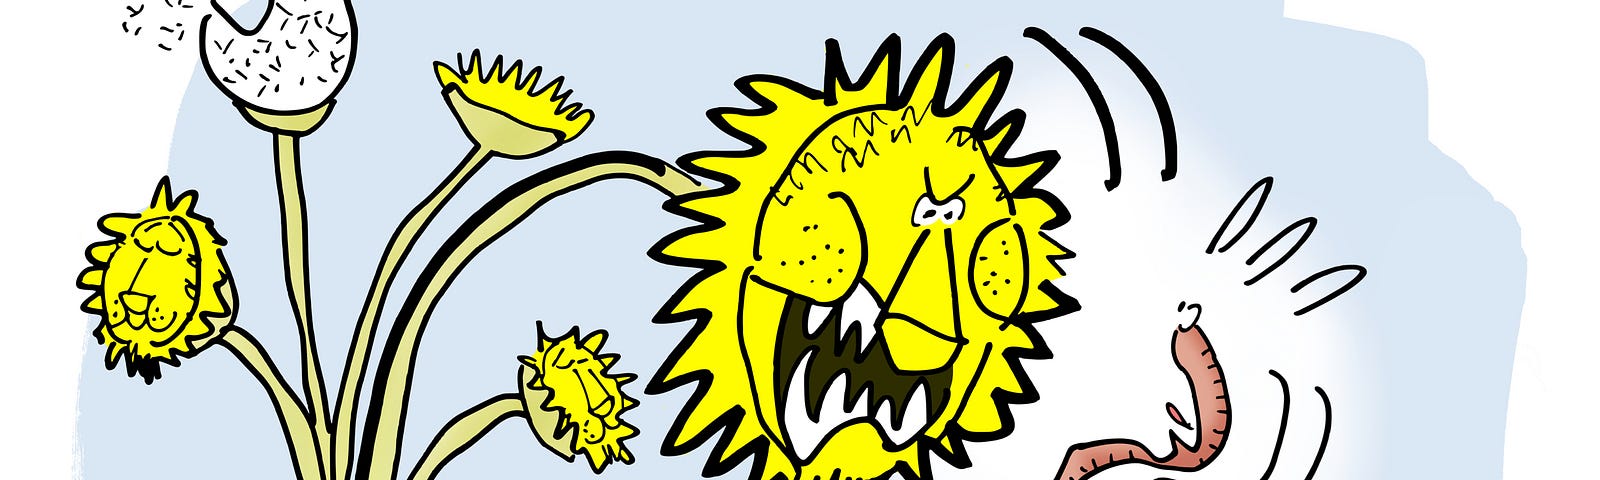 Cartoon illustration by Mark Armstrong. Cluster of dandelions in a lawn. Several of them have lion faces. The biggest lion-faced dandelion is leaning over showing his big teeth and scaring a worm who’s passing by.